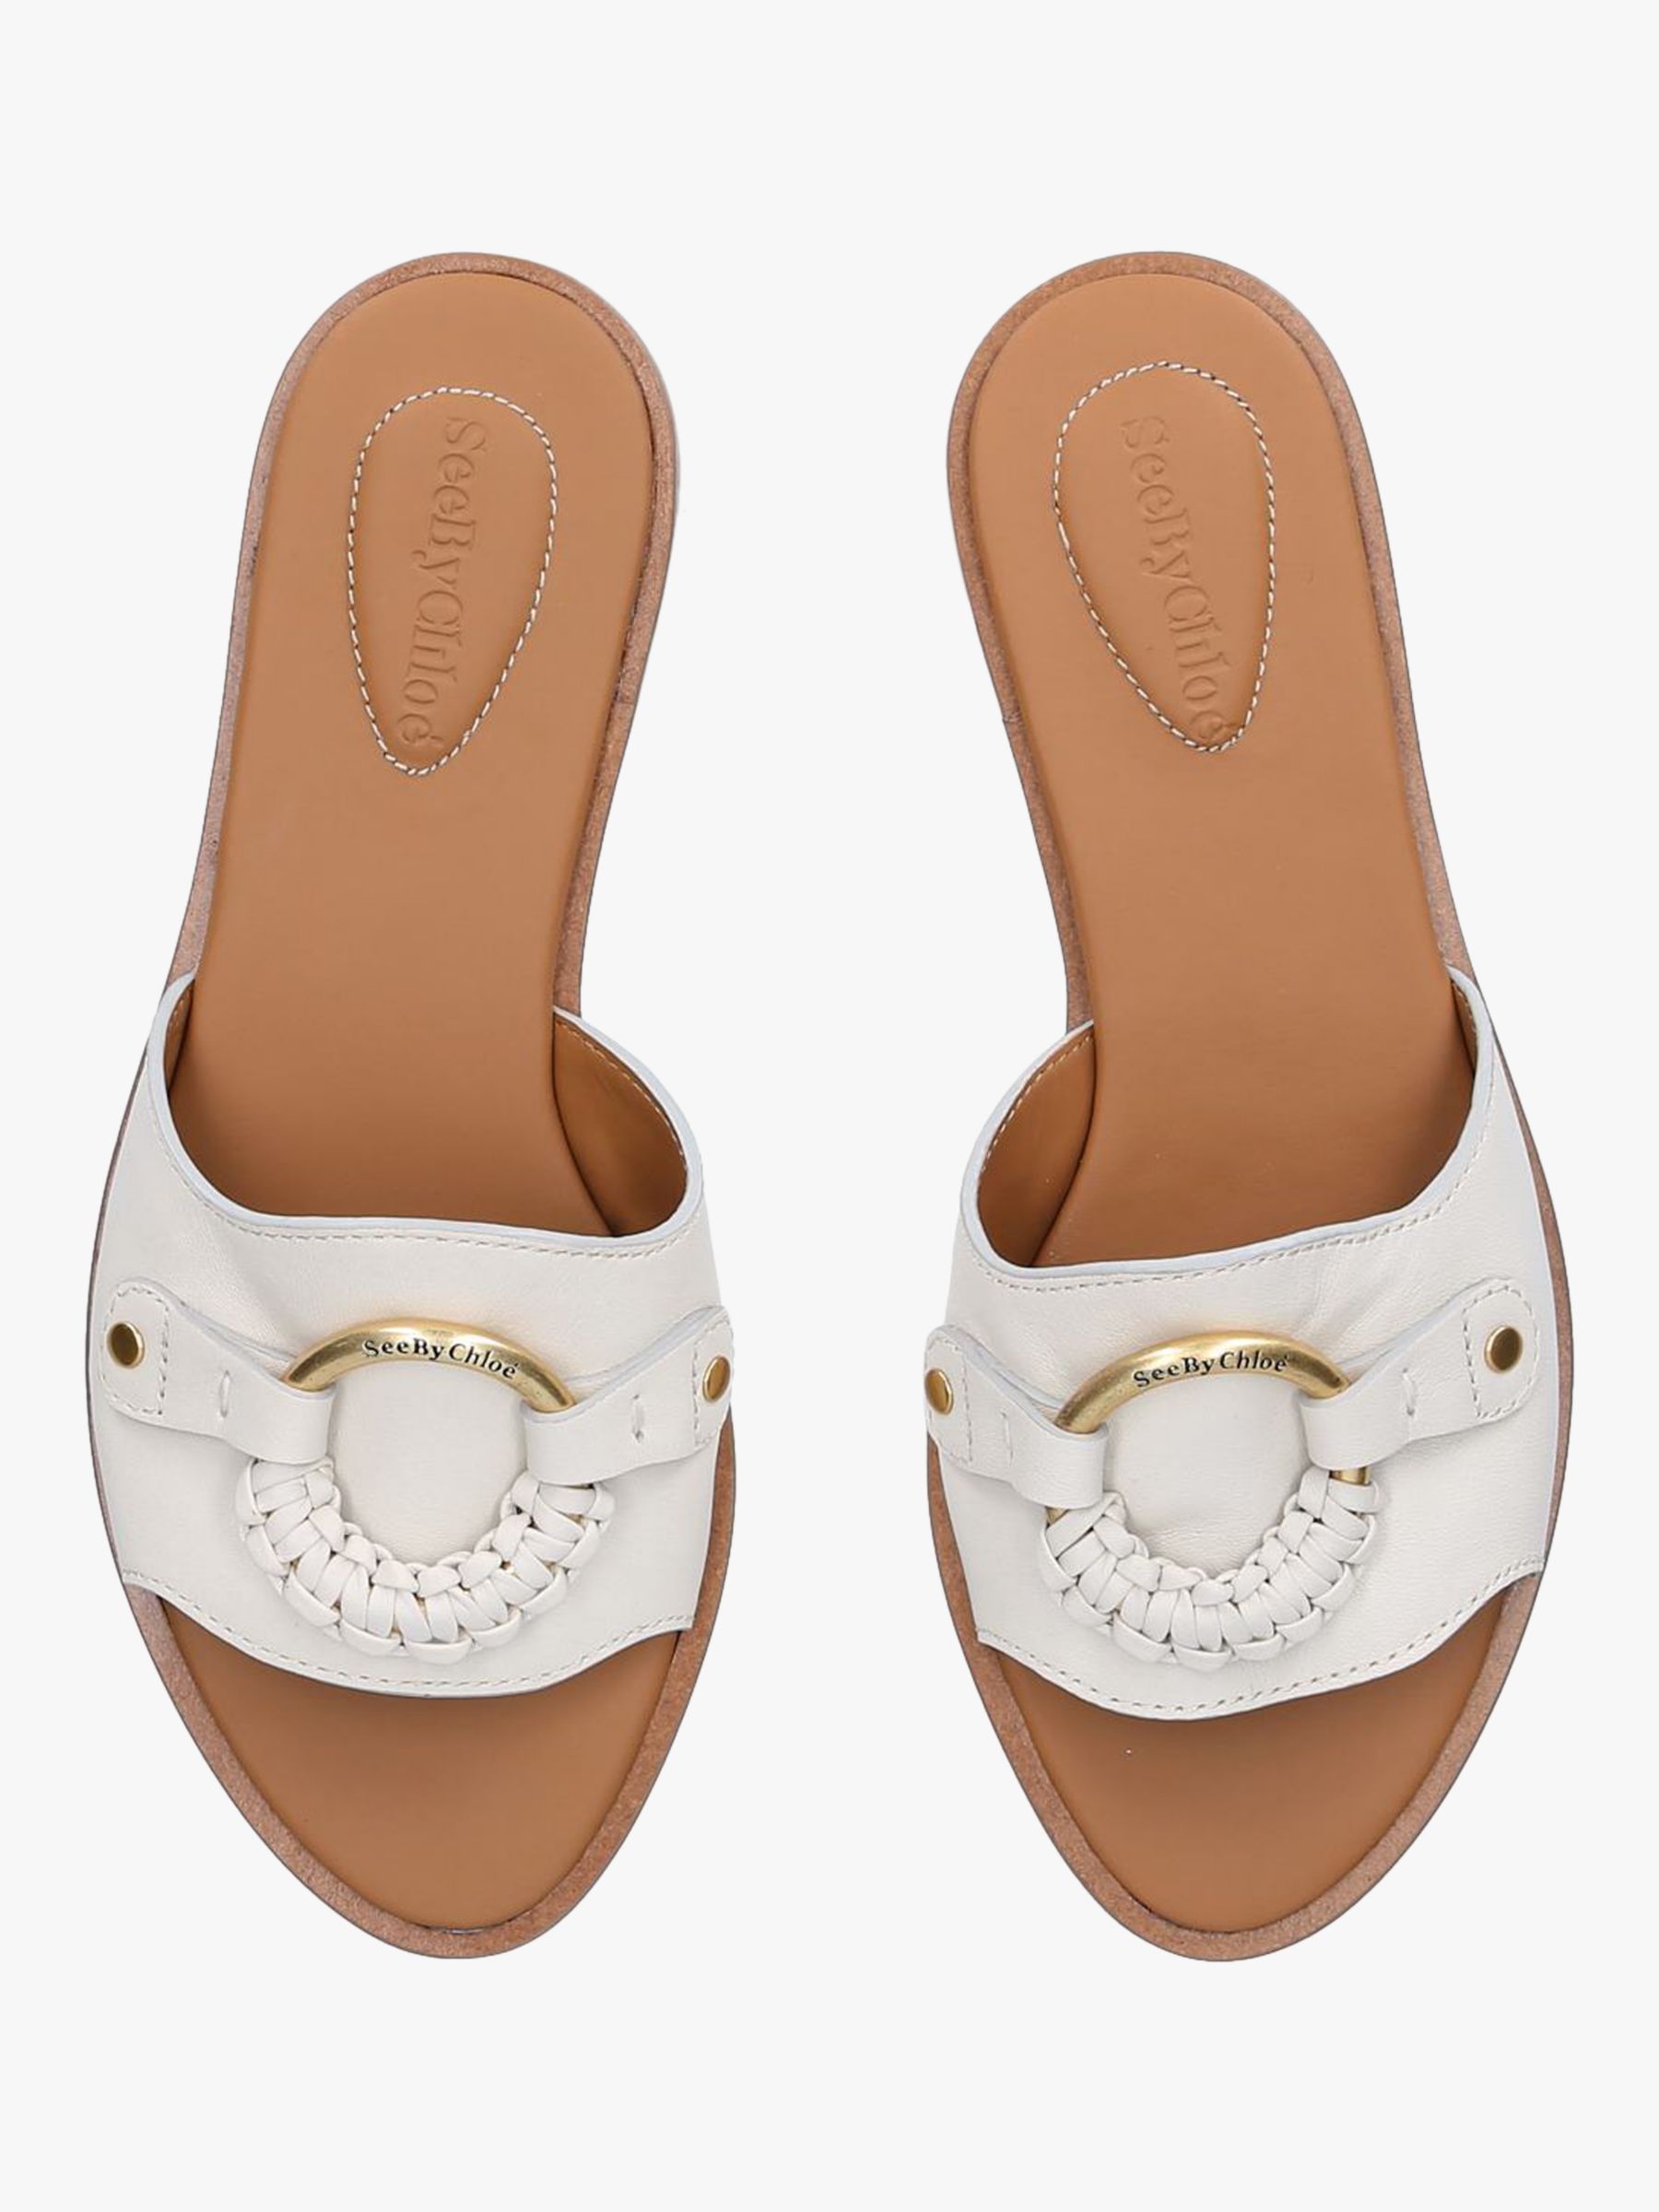 See By Chloé Ring Leather Sliders, White at John Lewis & Partners